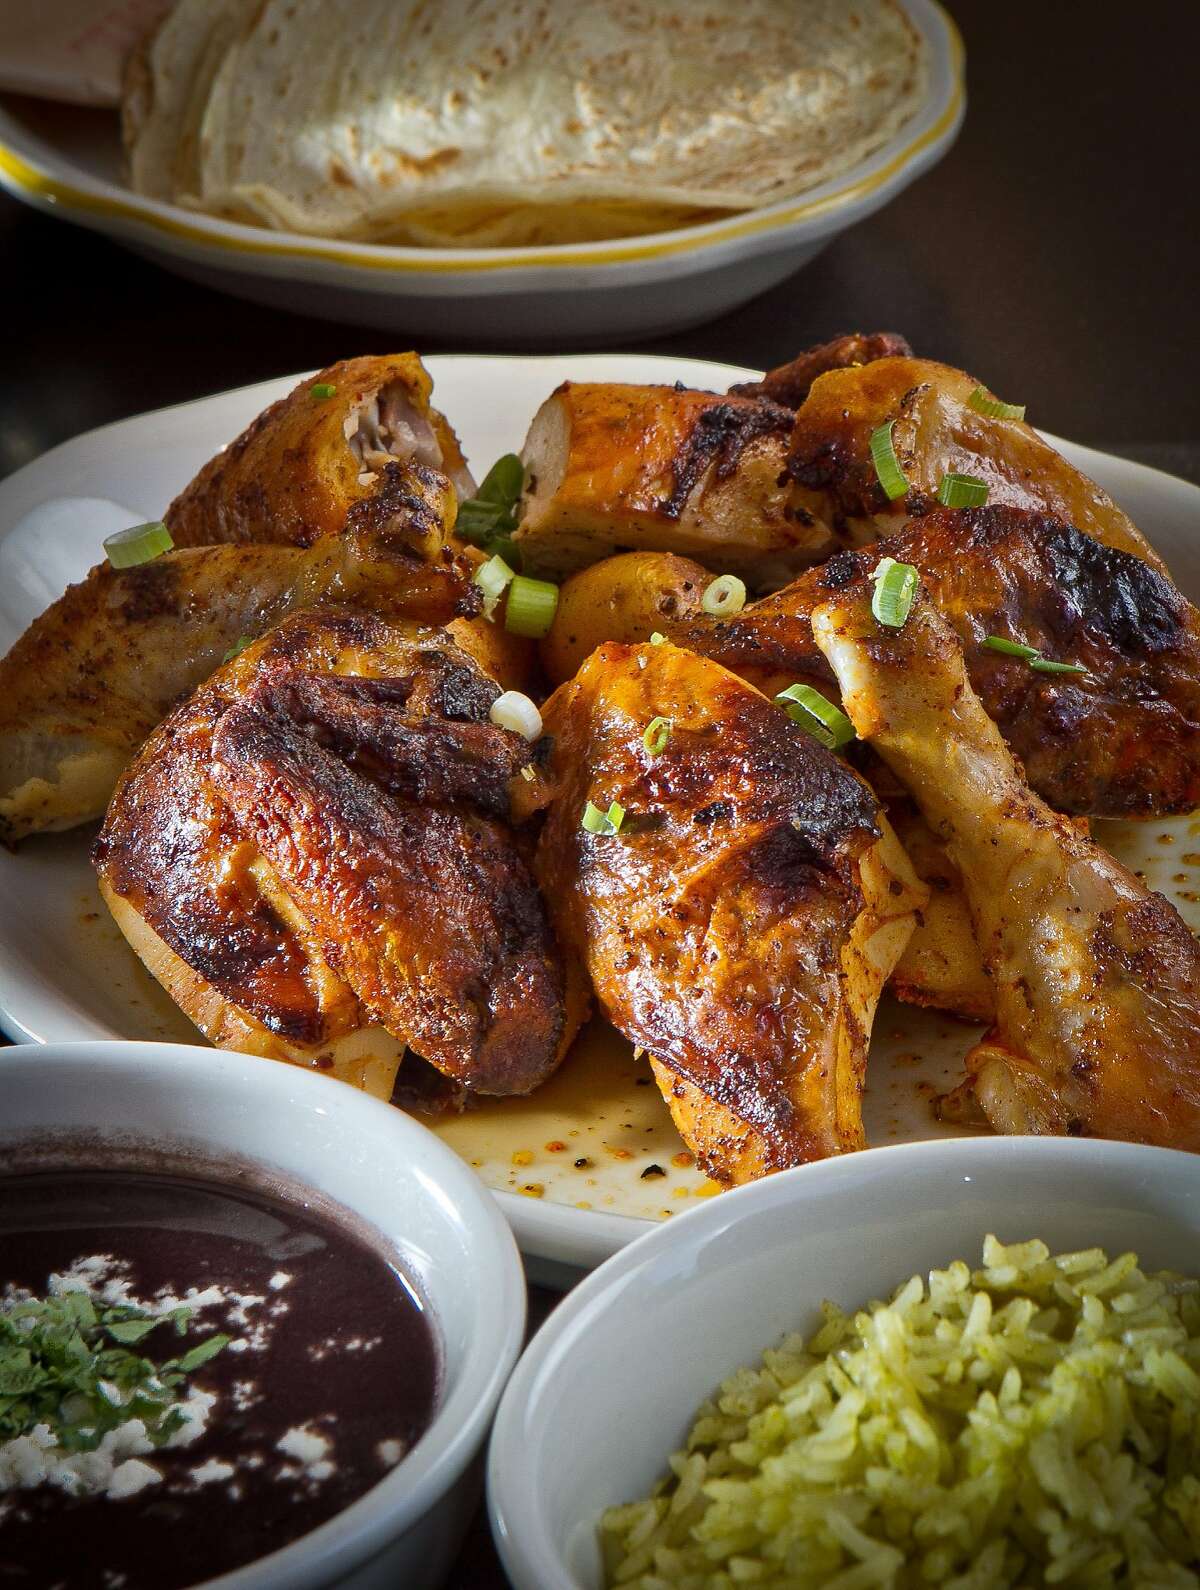 The Spit-Roasted Fulton Valley Chicken with Rice, Beans and Tortillas at Comal Restaurant in Berkeley, Calif., is seen on Tuesday, July 3rd, 2012.